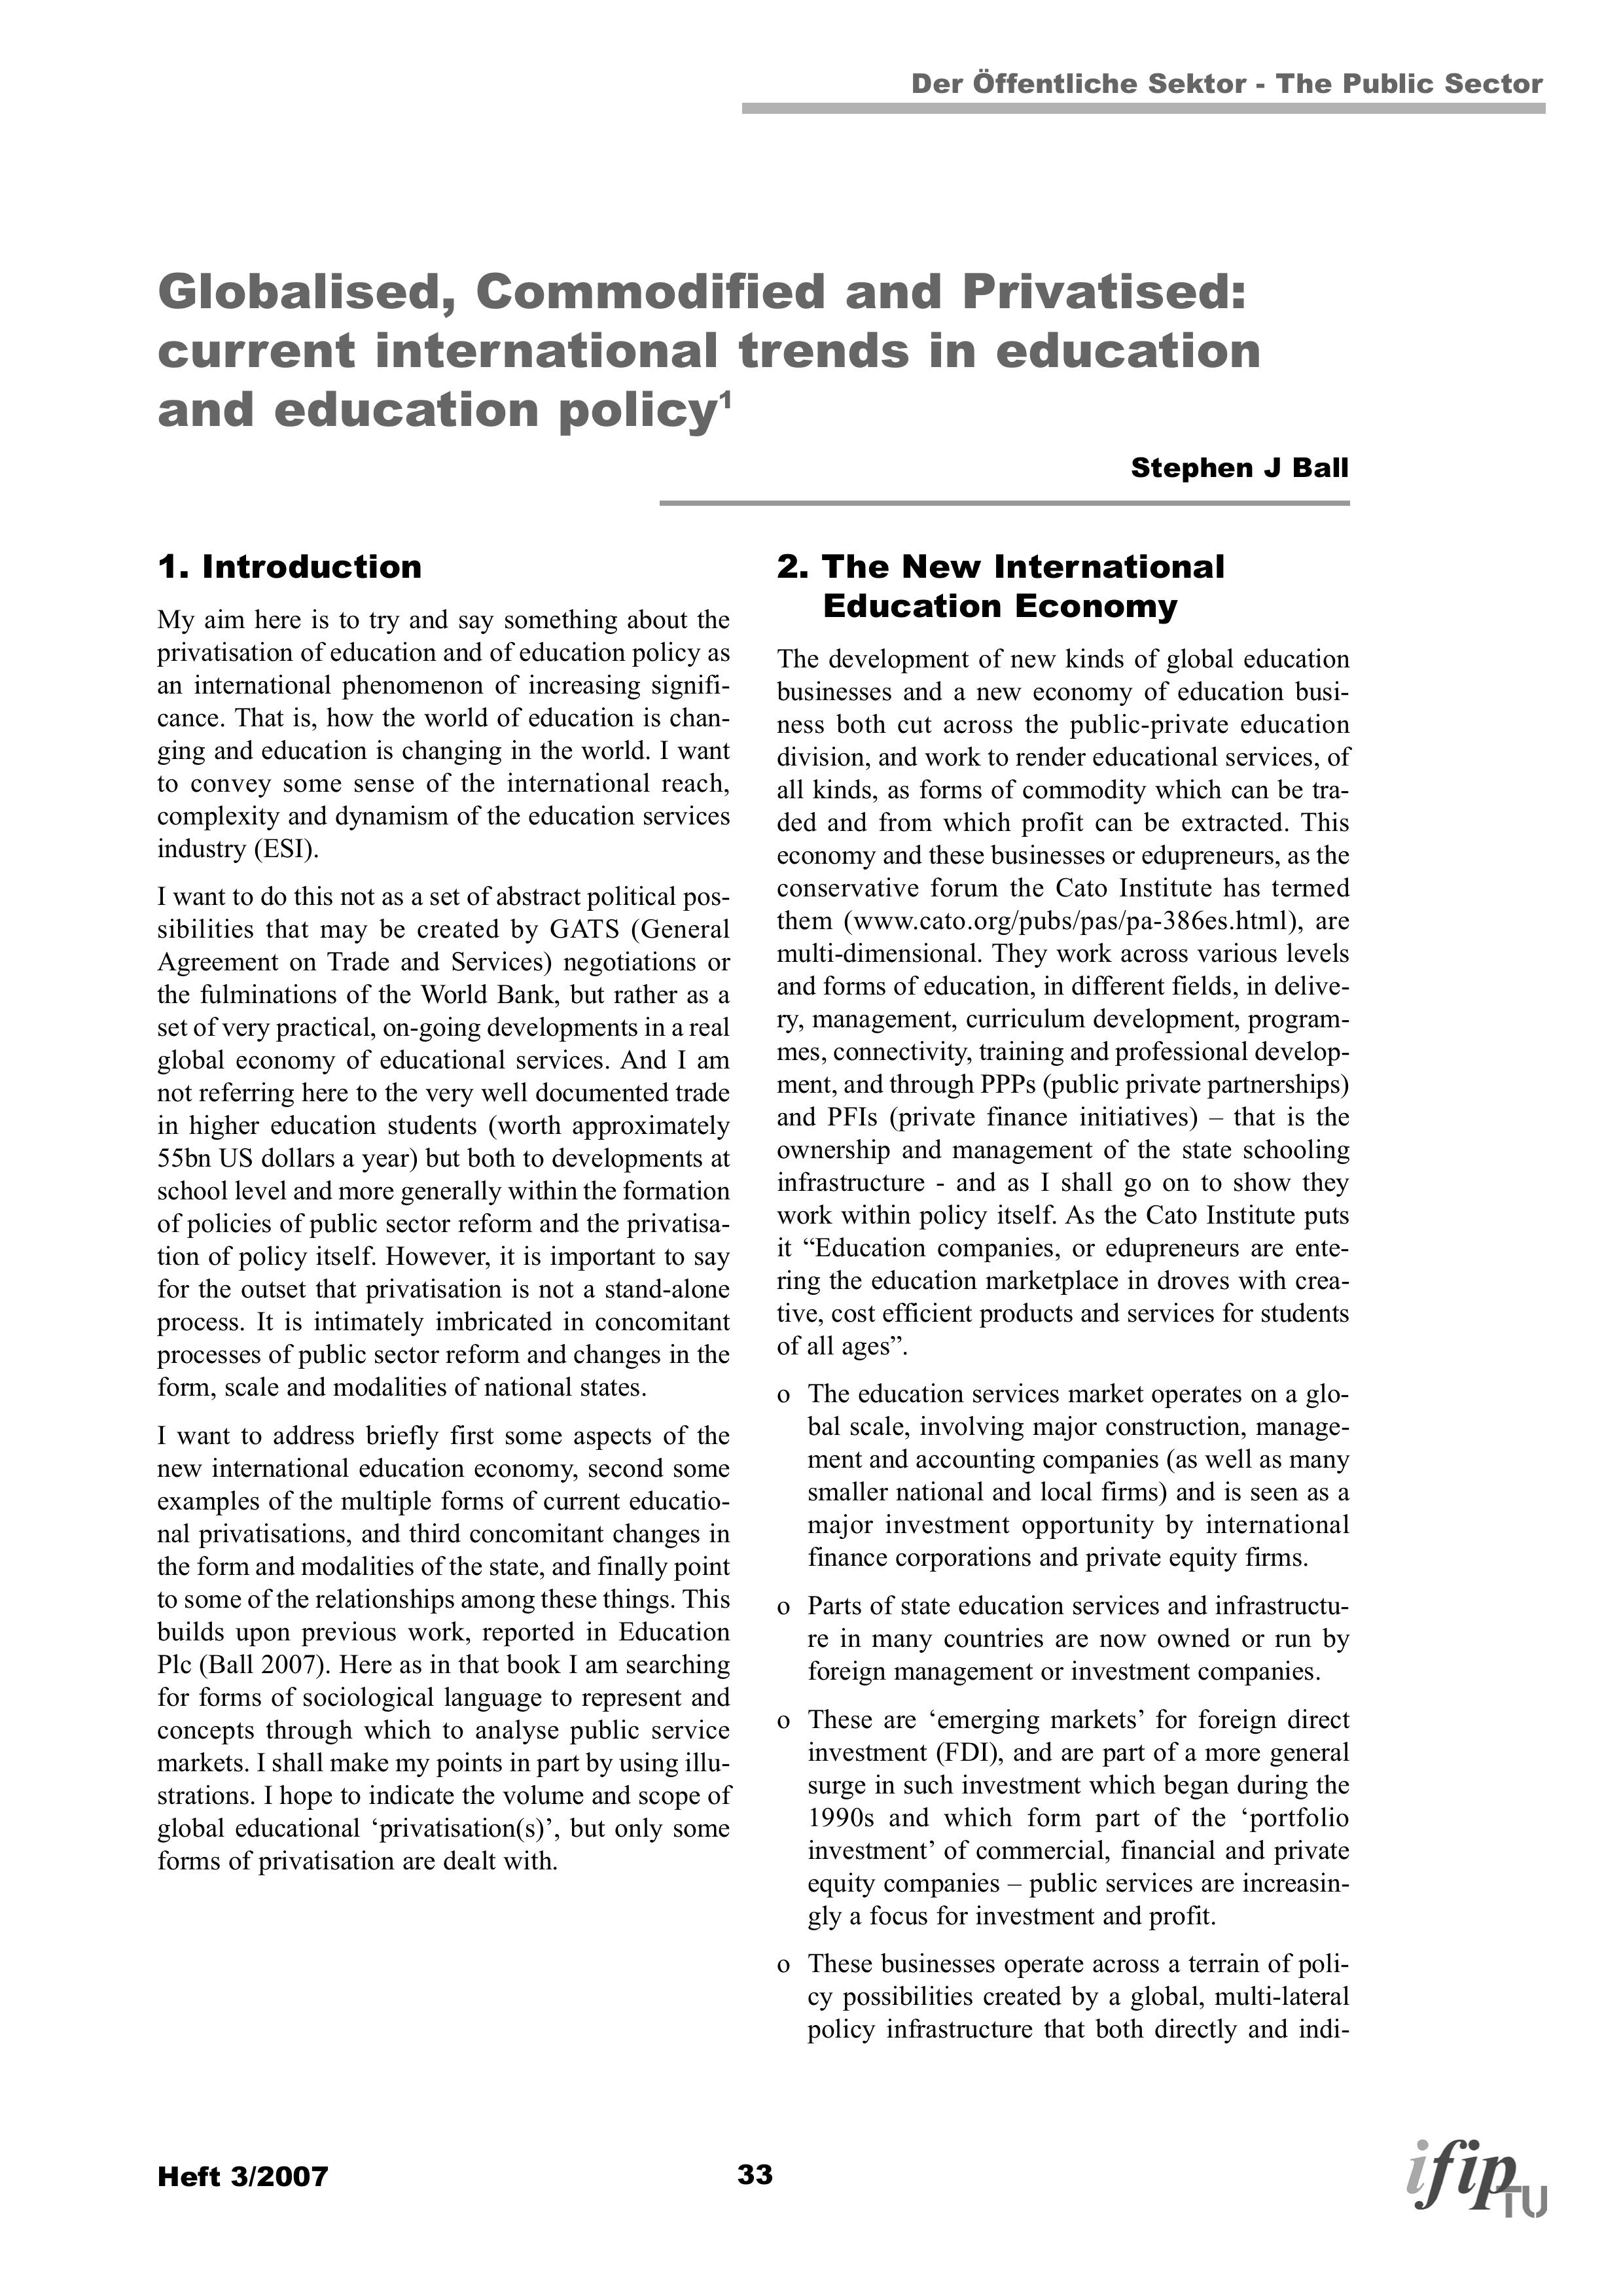 Globalised, Commodified and Privatised: current international trends in education and education policy